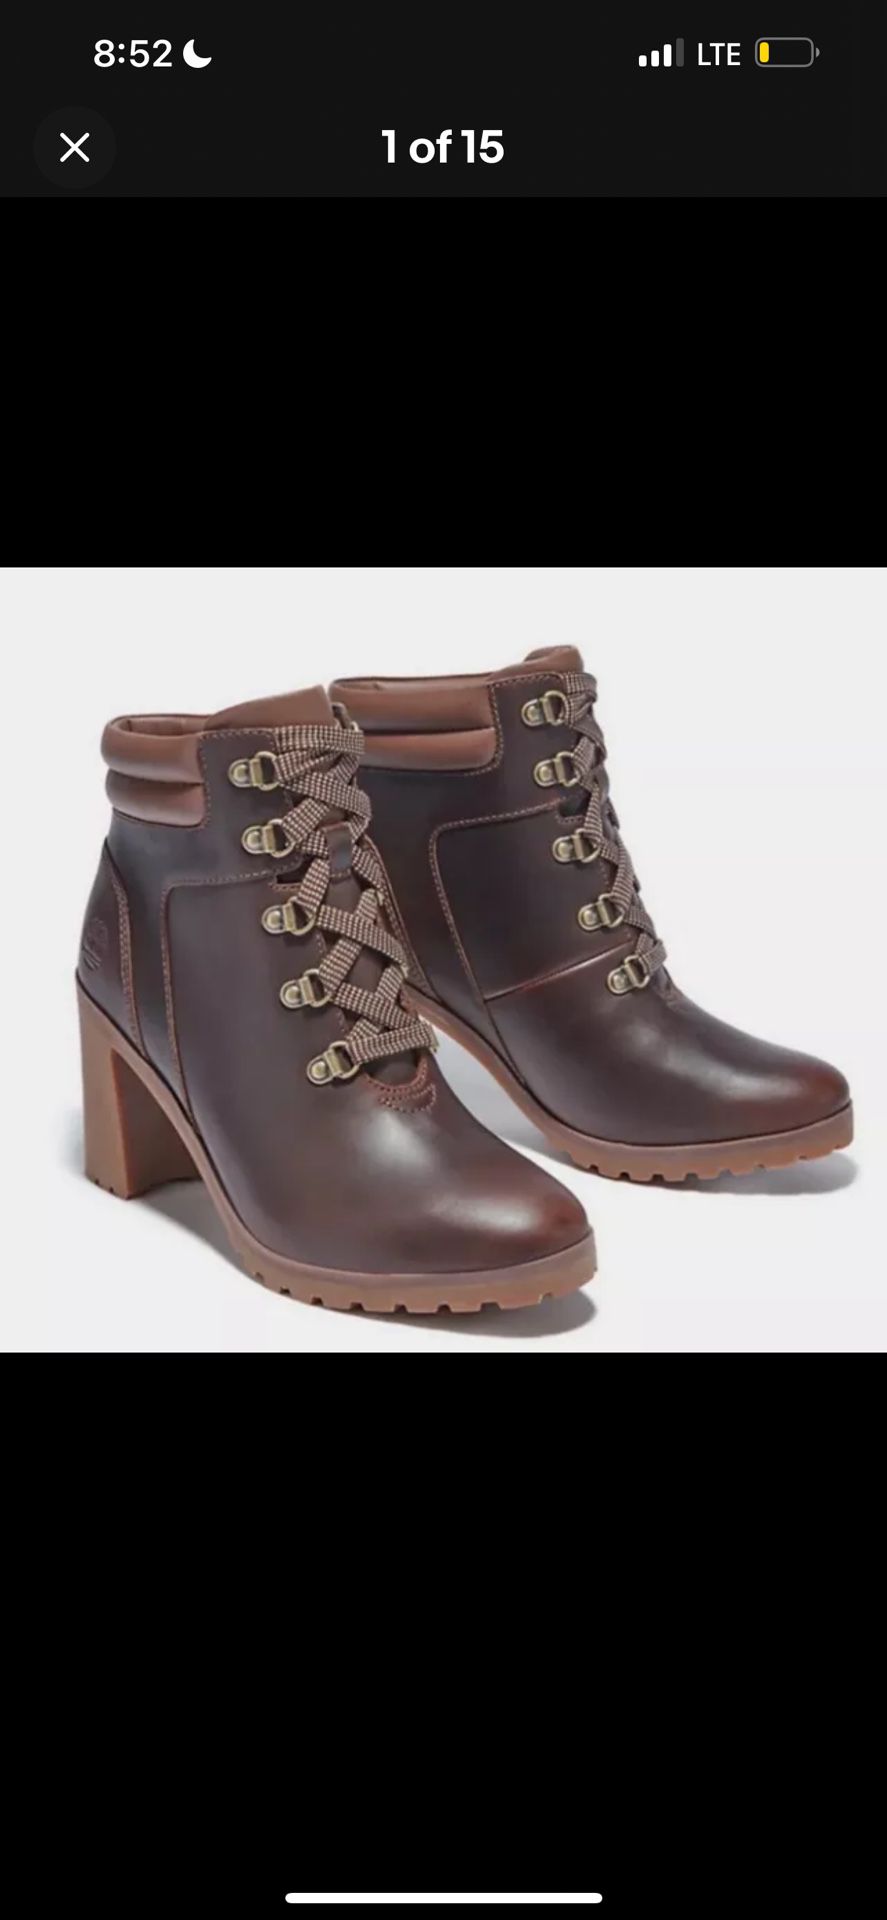 Timberland Allington women's brown heeled ankle boots